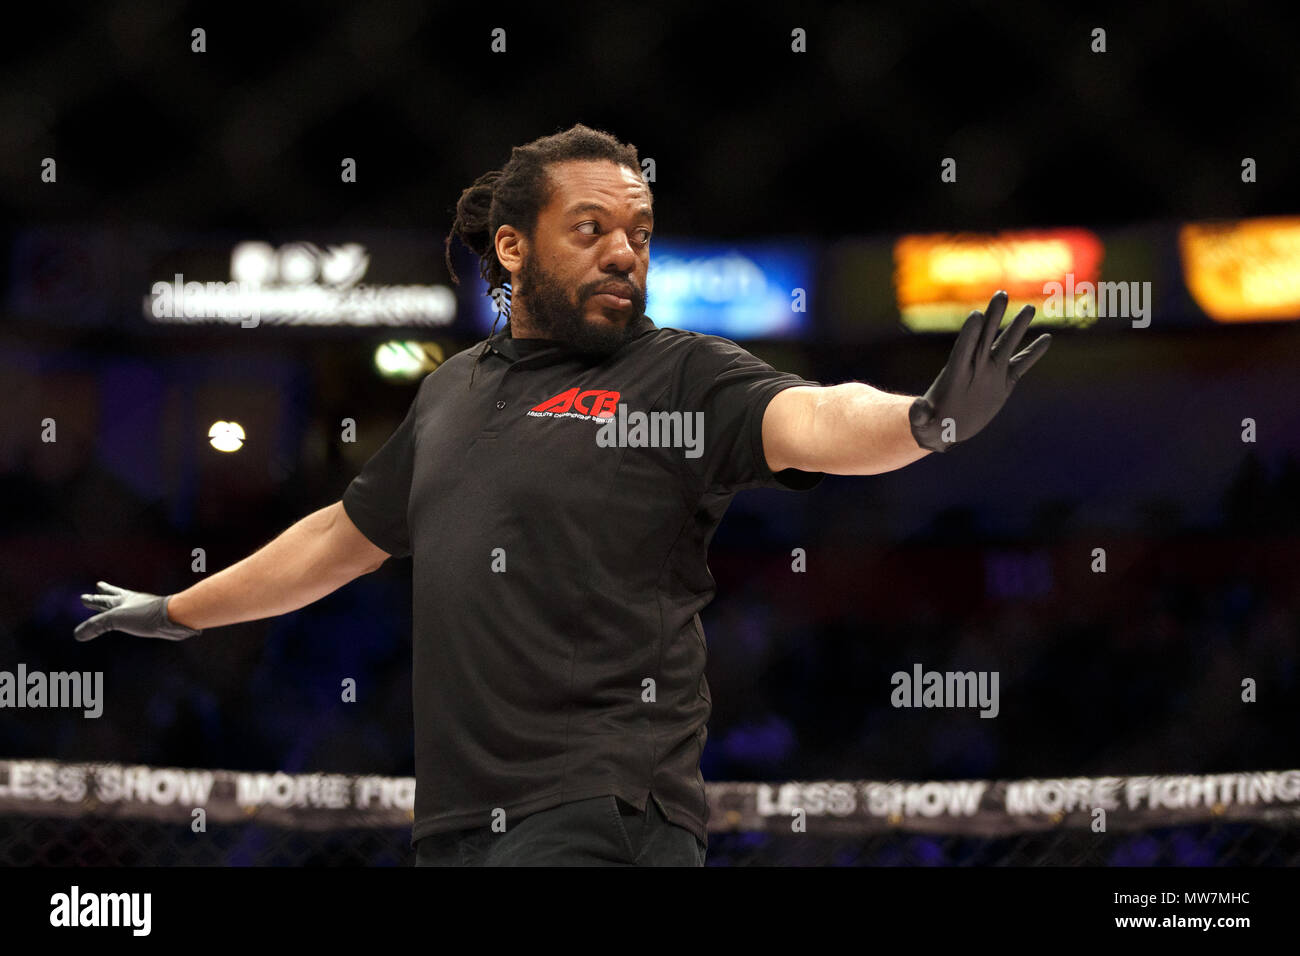 Herb Dean, Mixed Martial Arts referee, in action at Absolute Championship Berkut's ACB 54 event in Manchester, UK in March 2017. Stock Photo